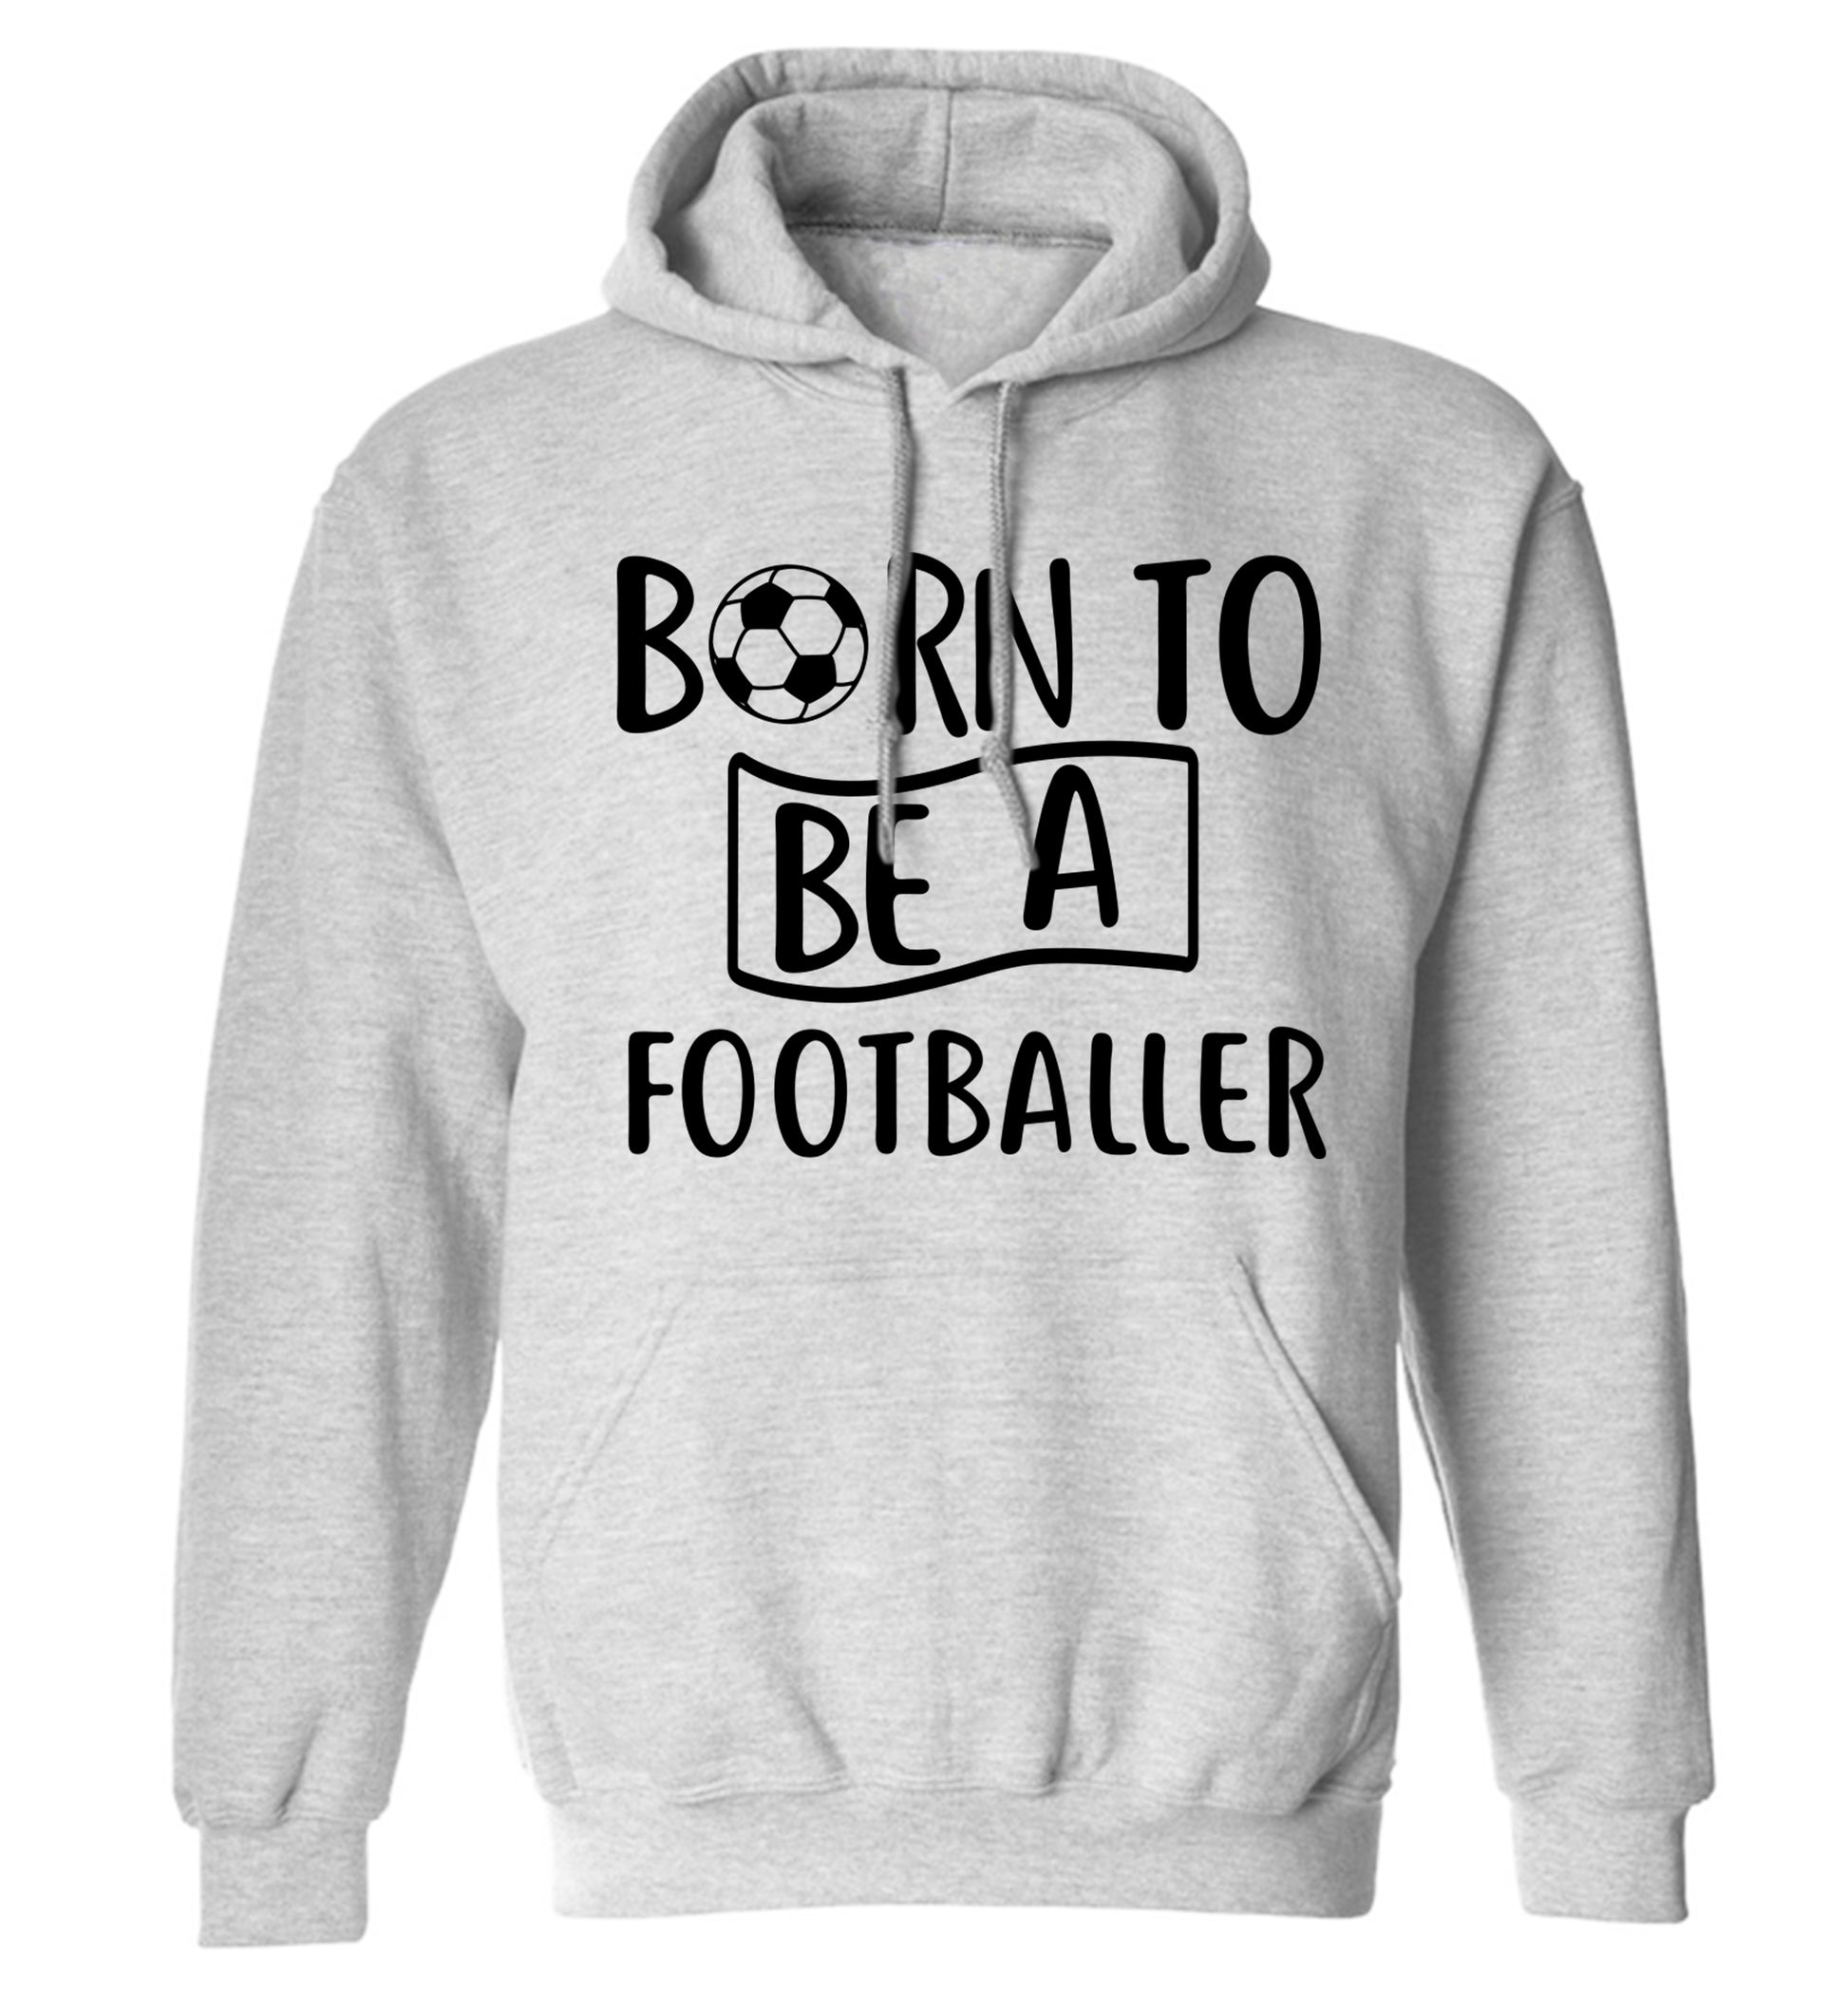 Born to be a footballer adults unisexgrey hoodie 2XL